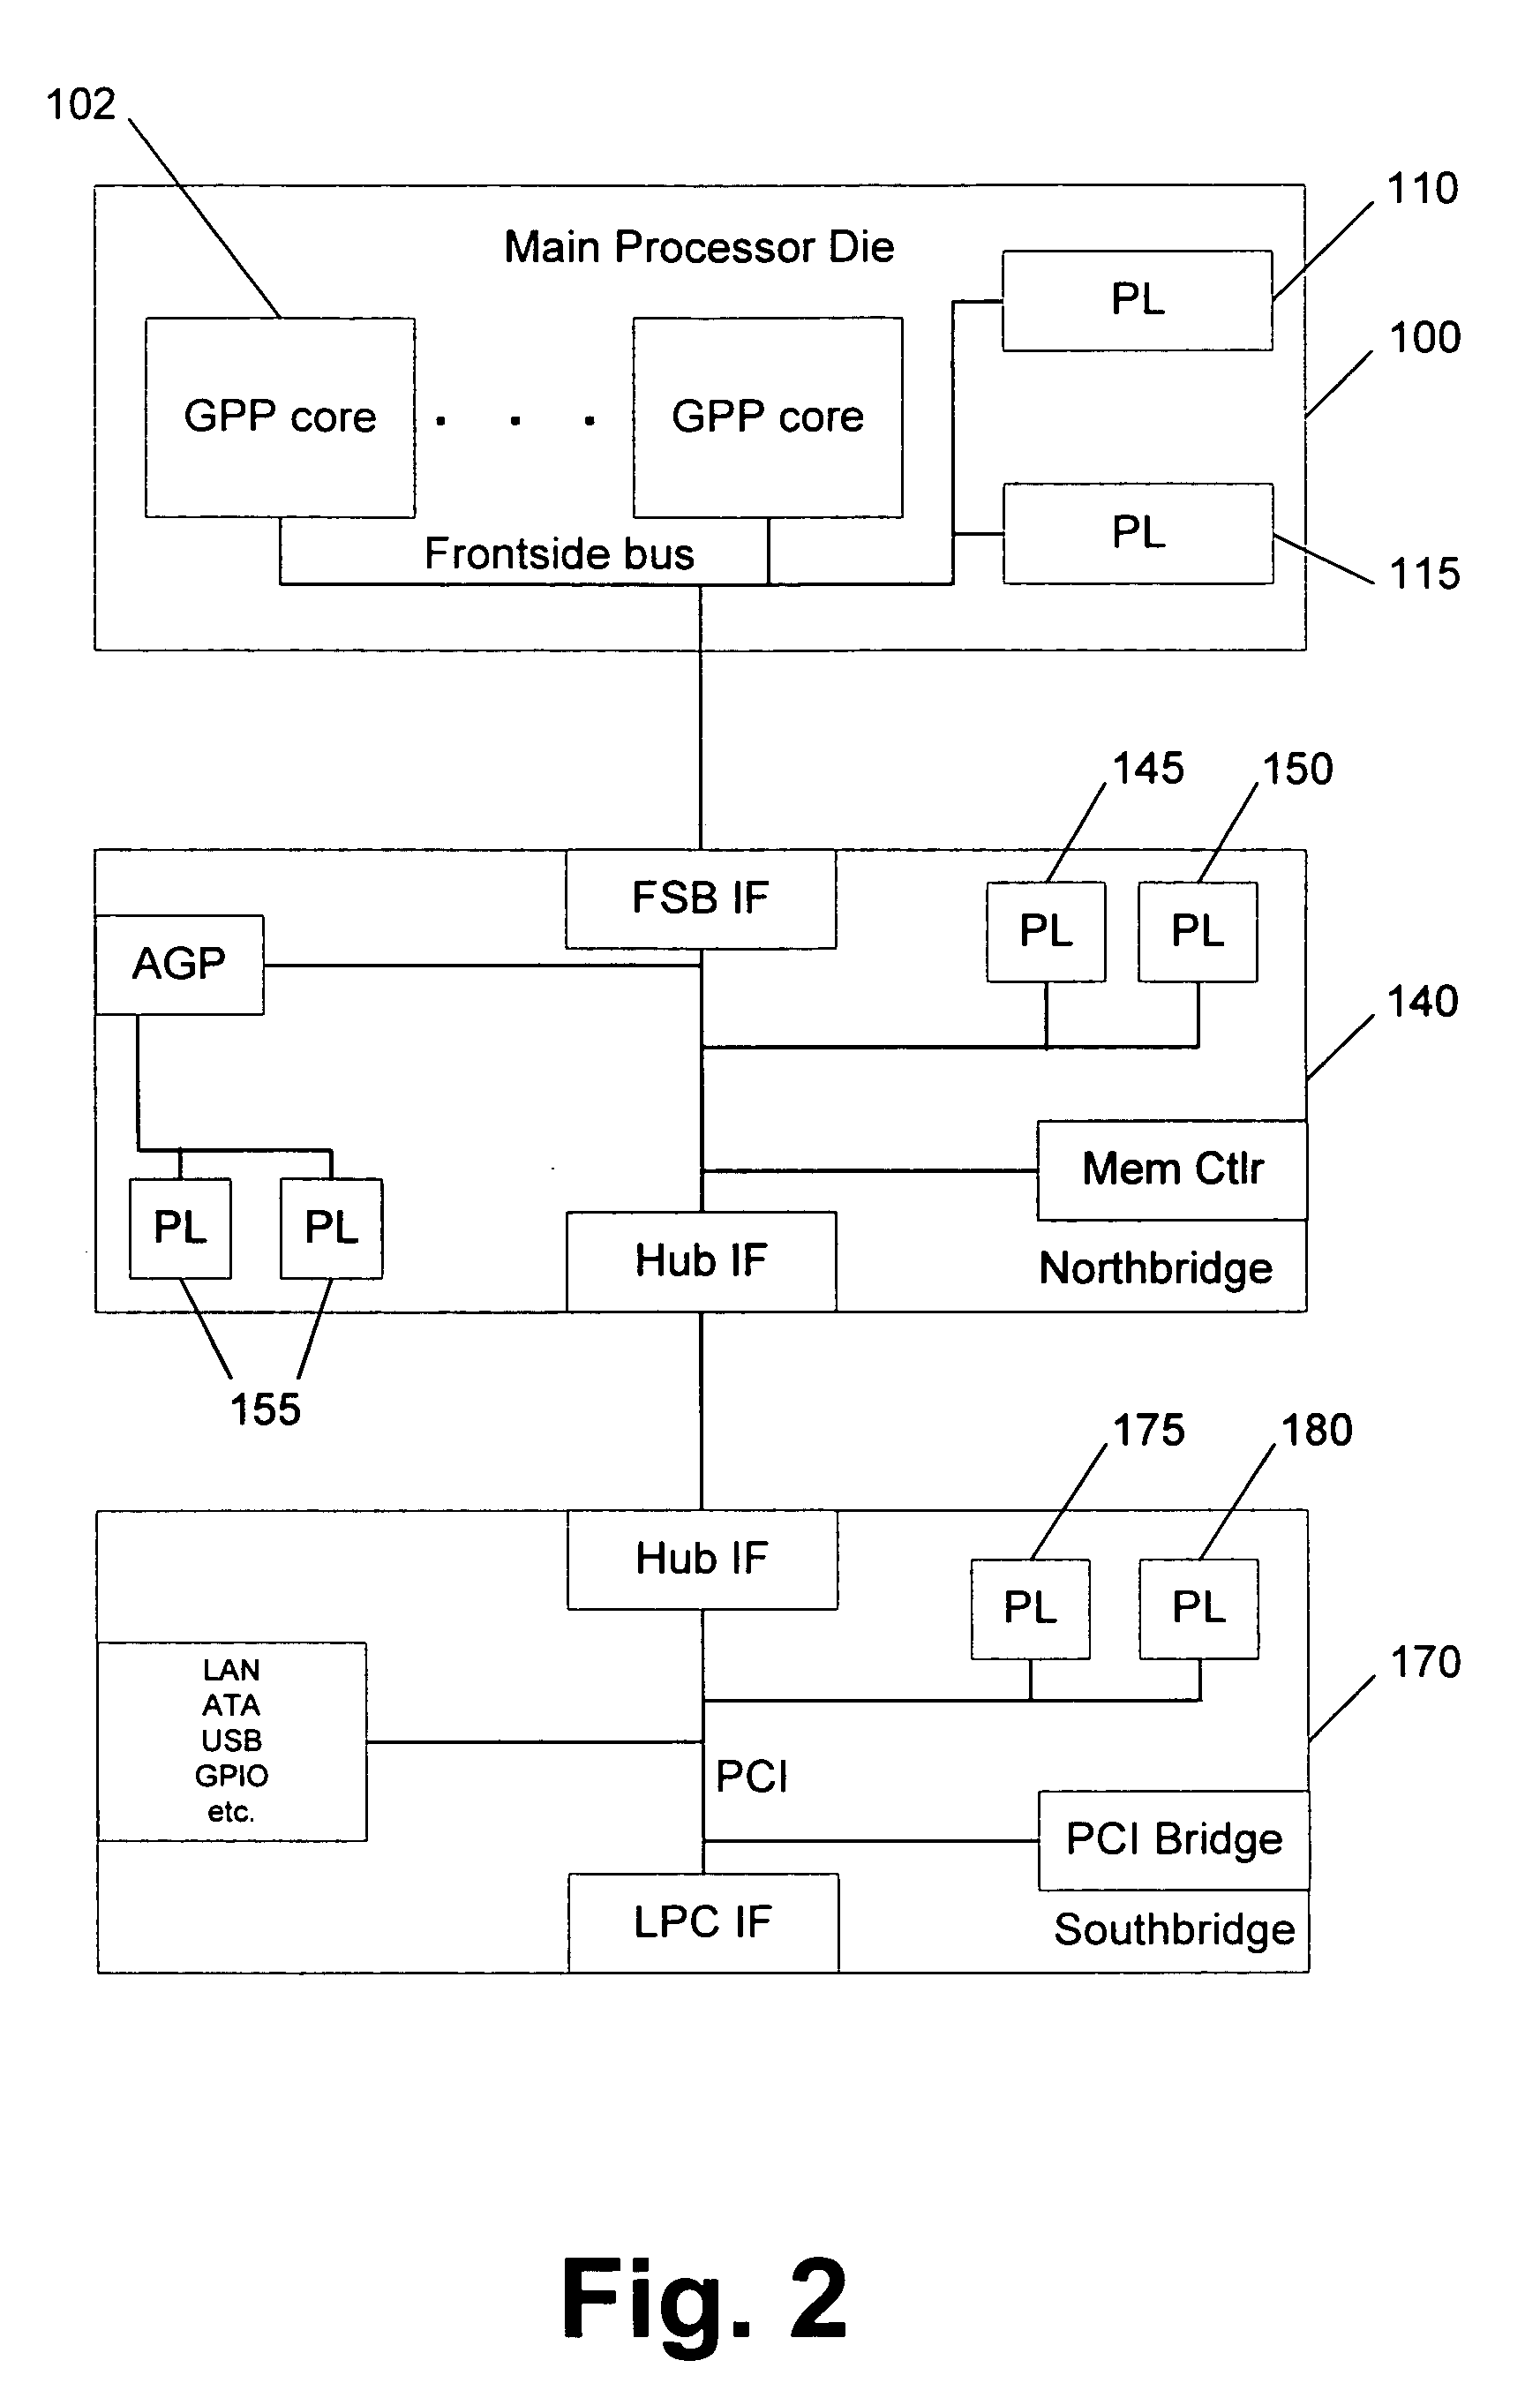 Integrating programmable logic into personal computer (PC) architecture